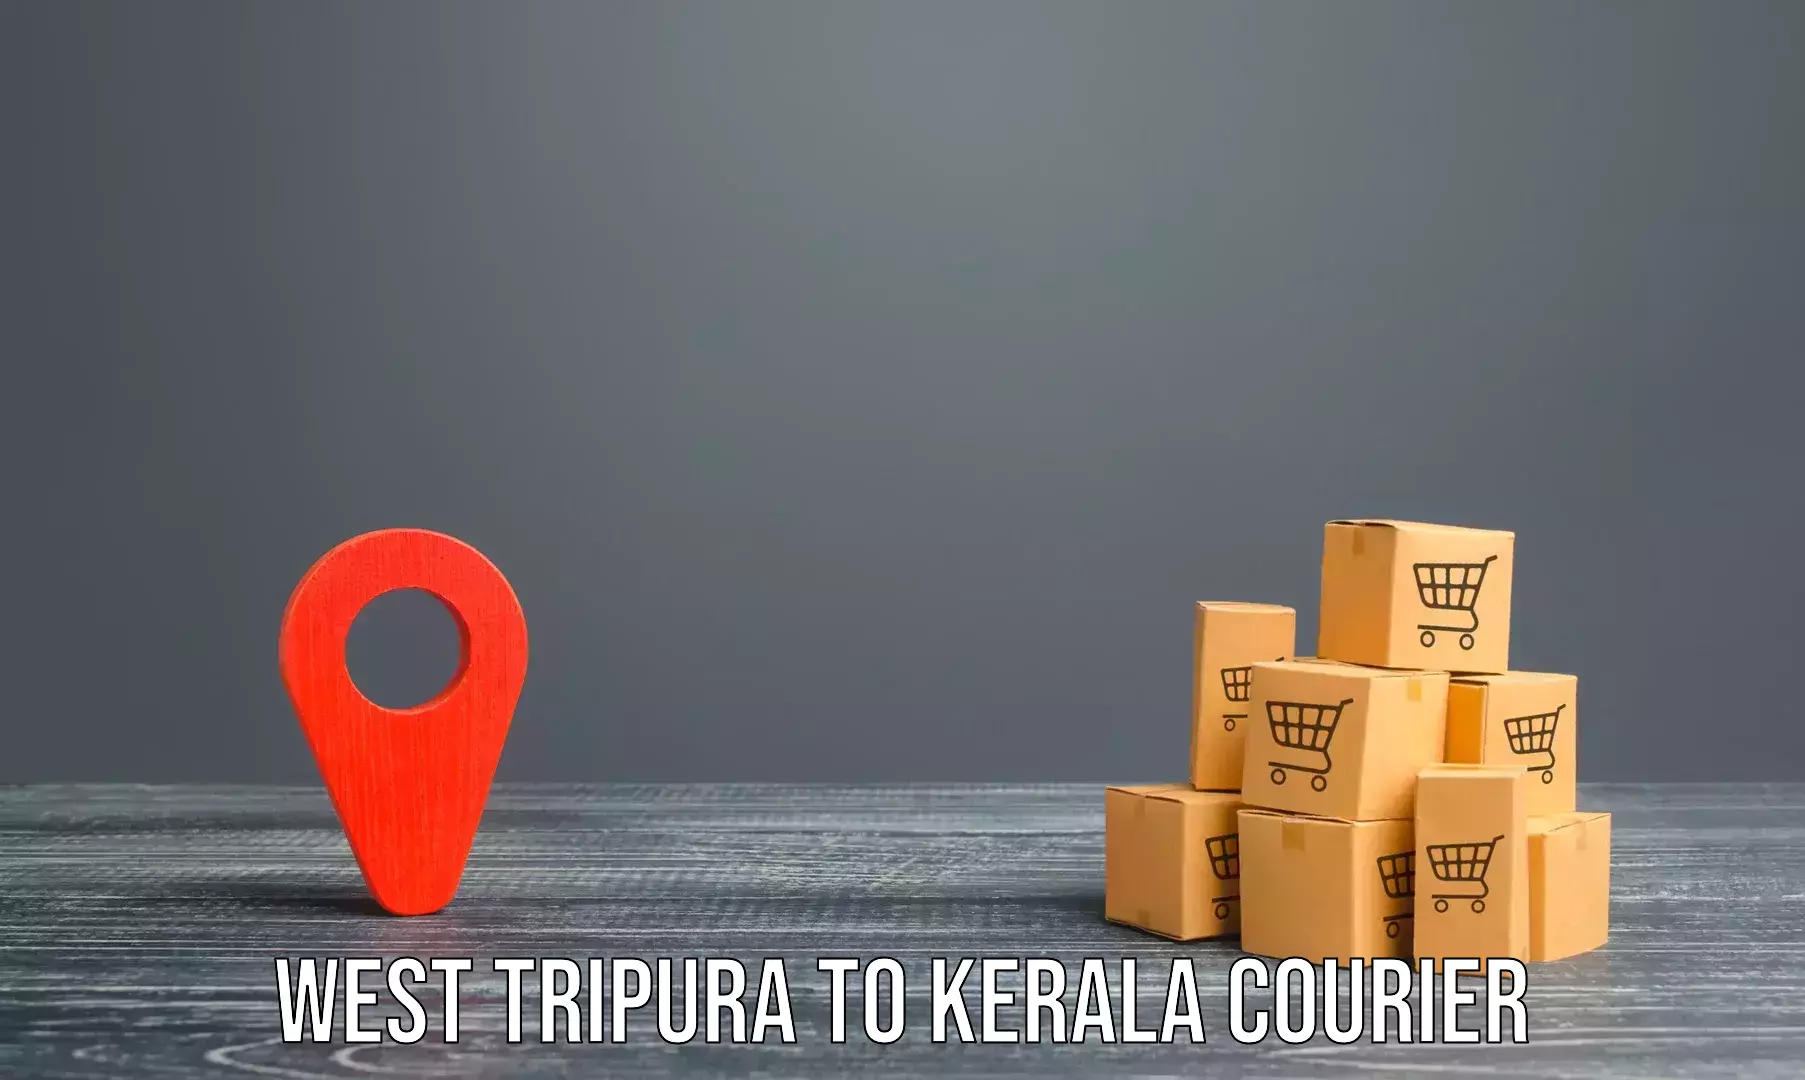 Reliable furniture transport West Tripura to Rajamudy